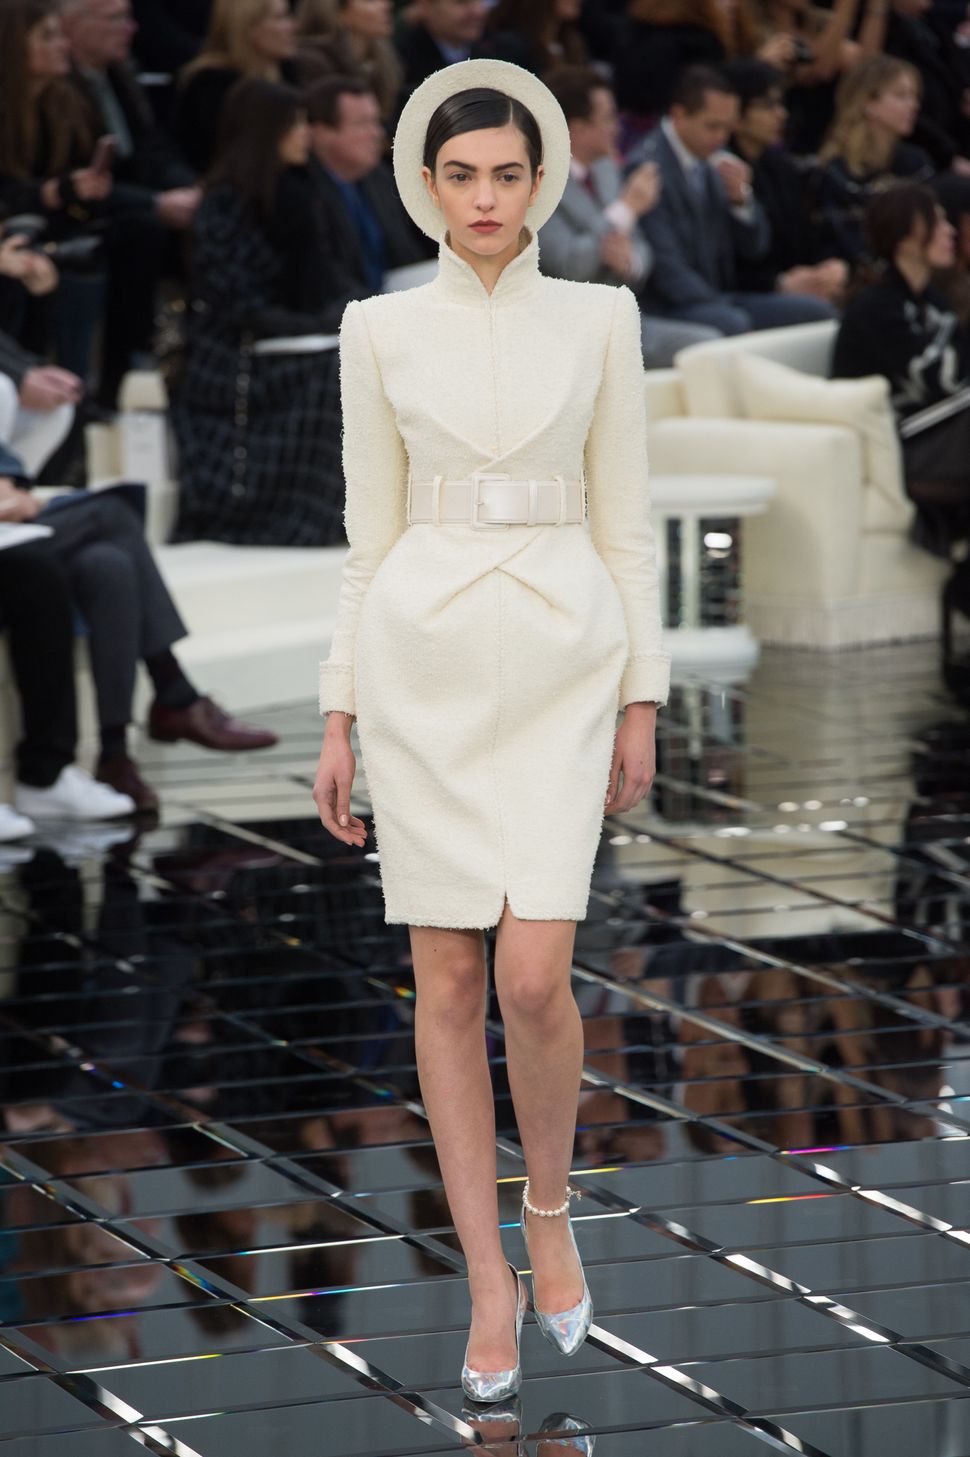 Chanel Just Unveiled The Dreamiest Dresses You'll See This Year | HuffPost